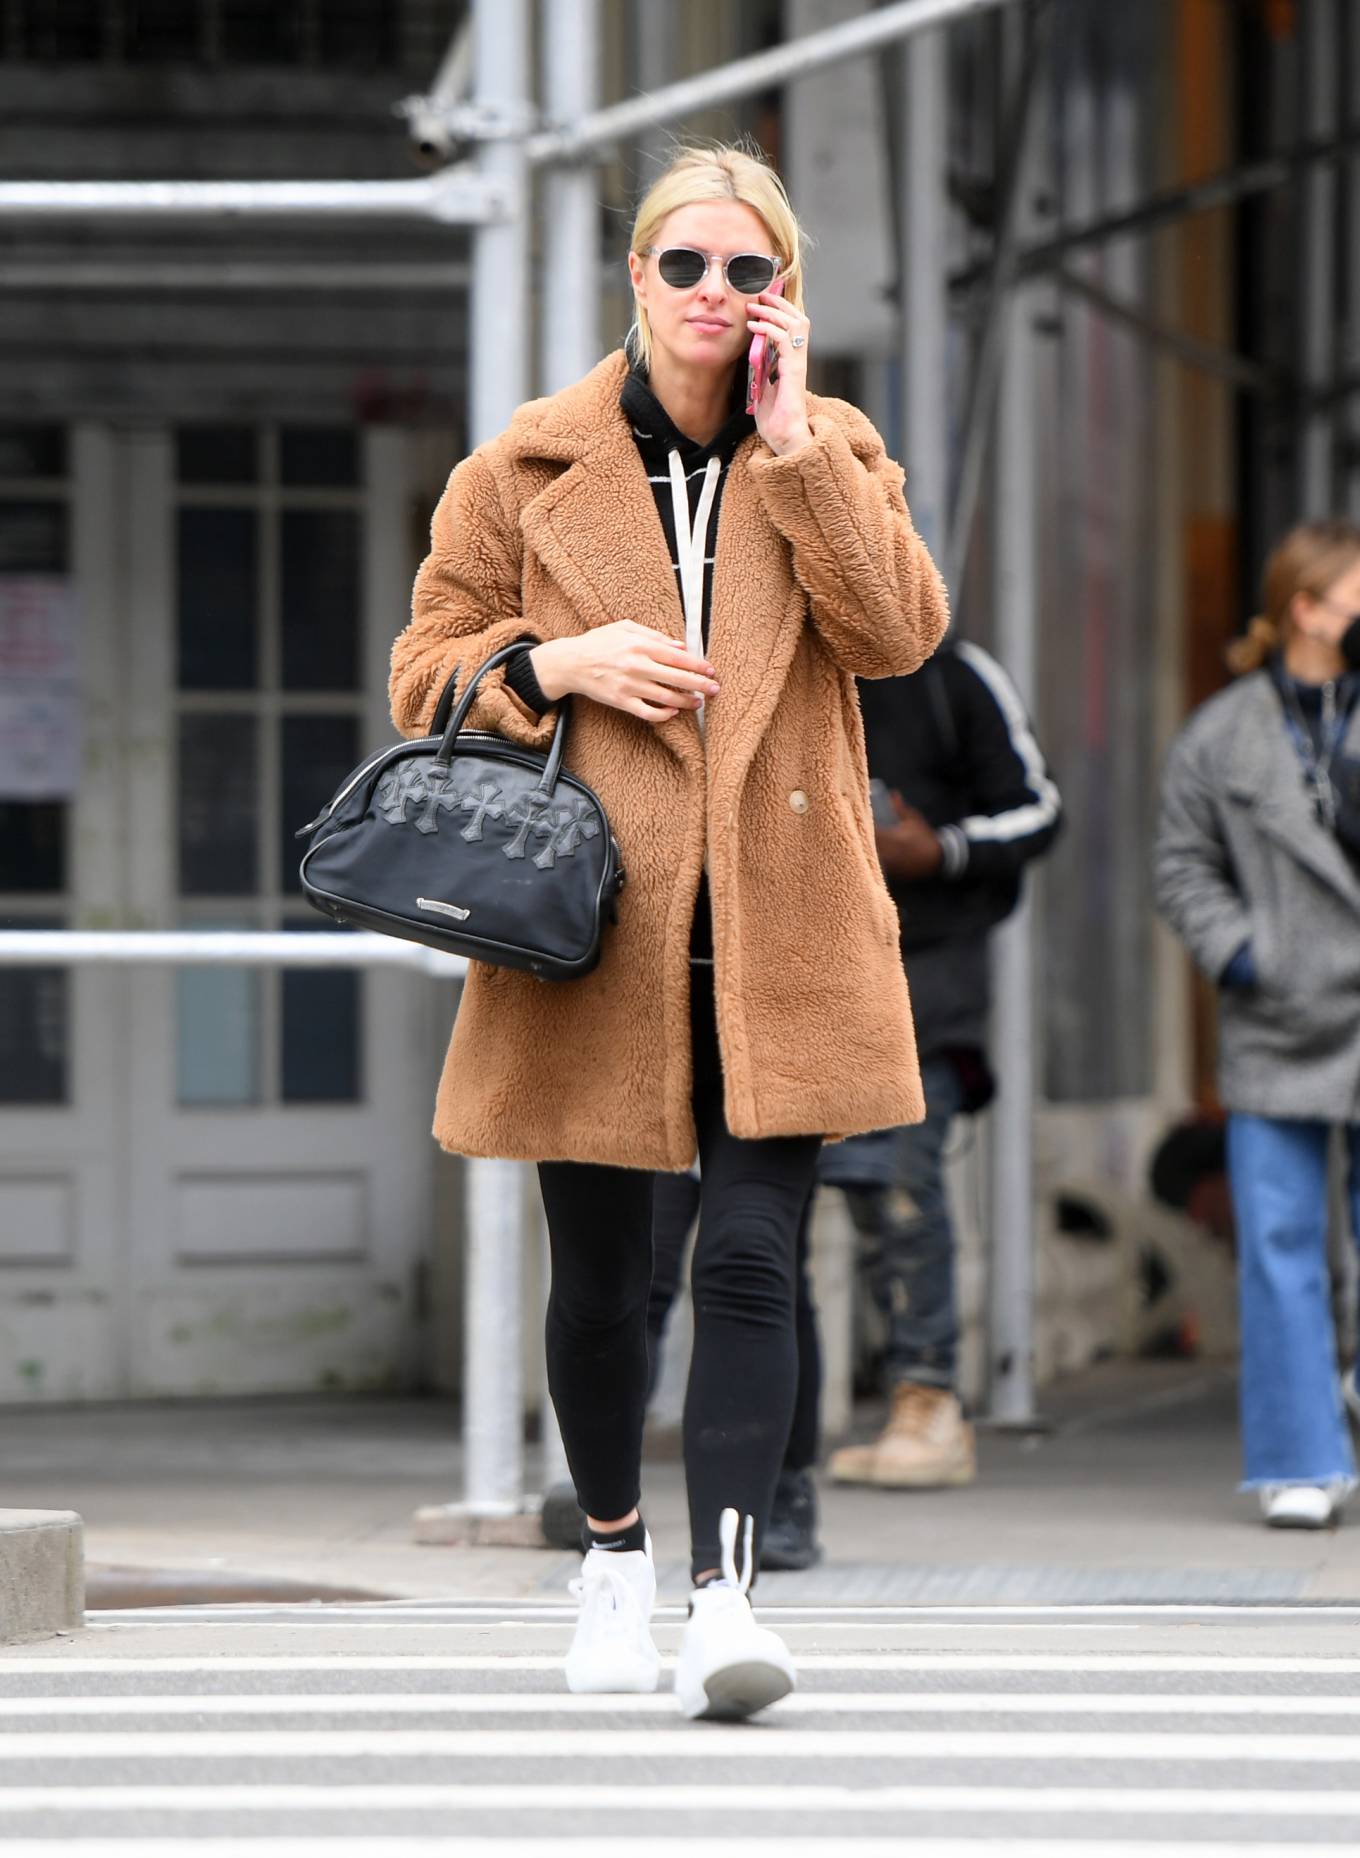 Nicky Hilton - Spotted on a chilly day in New York